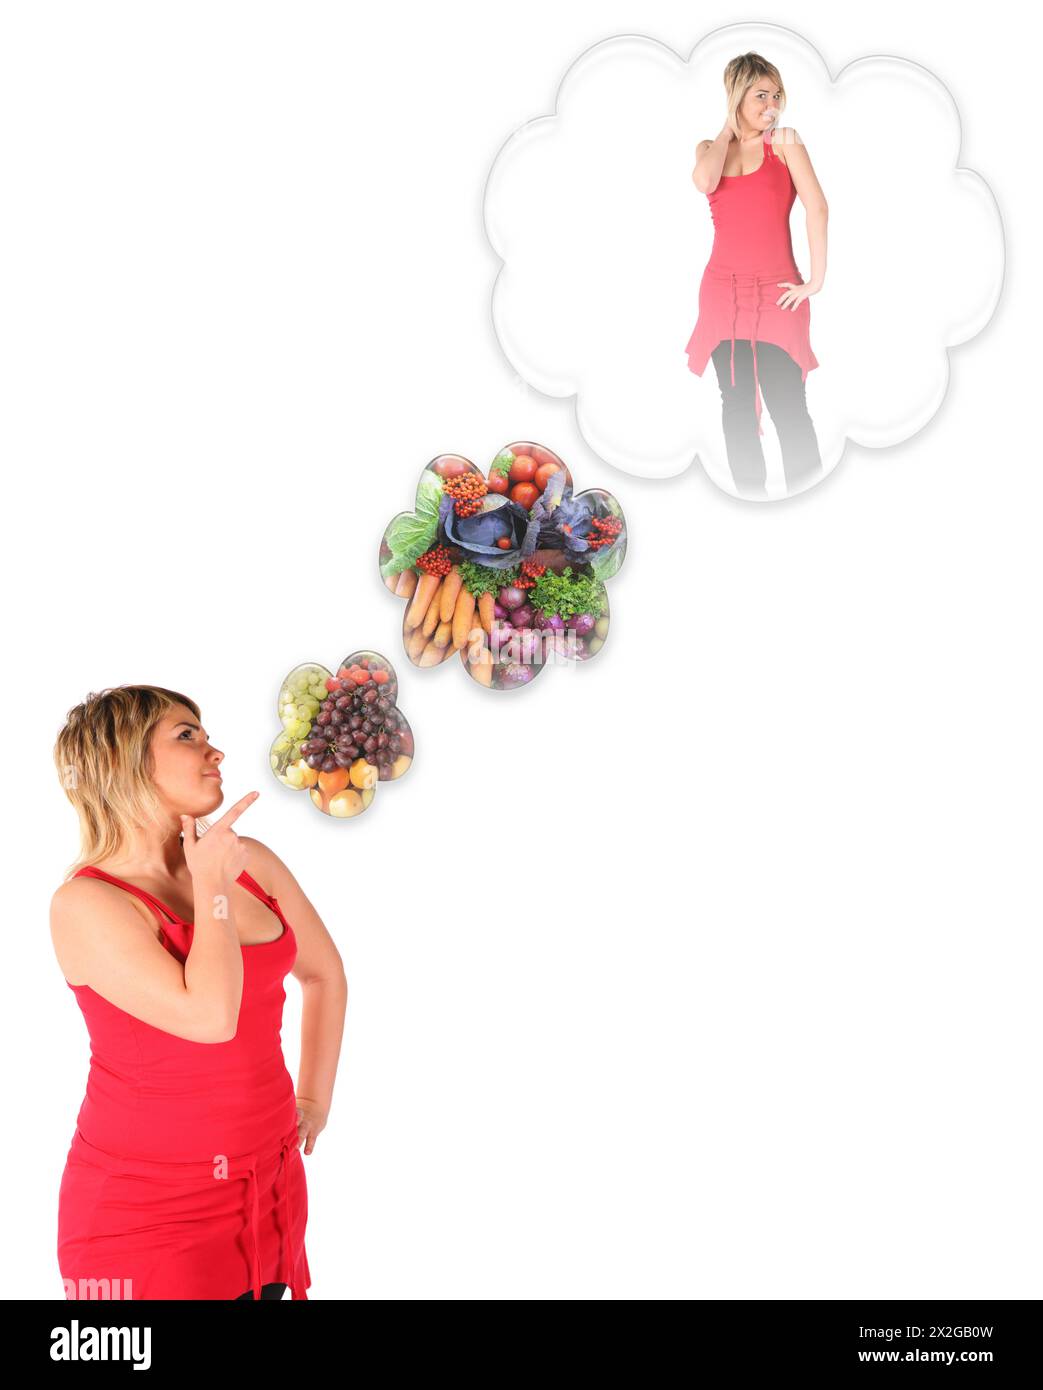 plumpy young girl thinking about slim body with vegetable diet collage Stock Photo